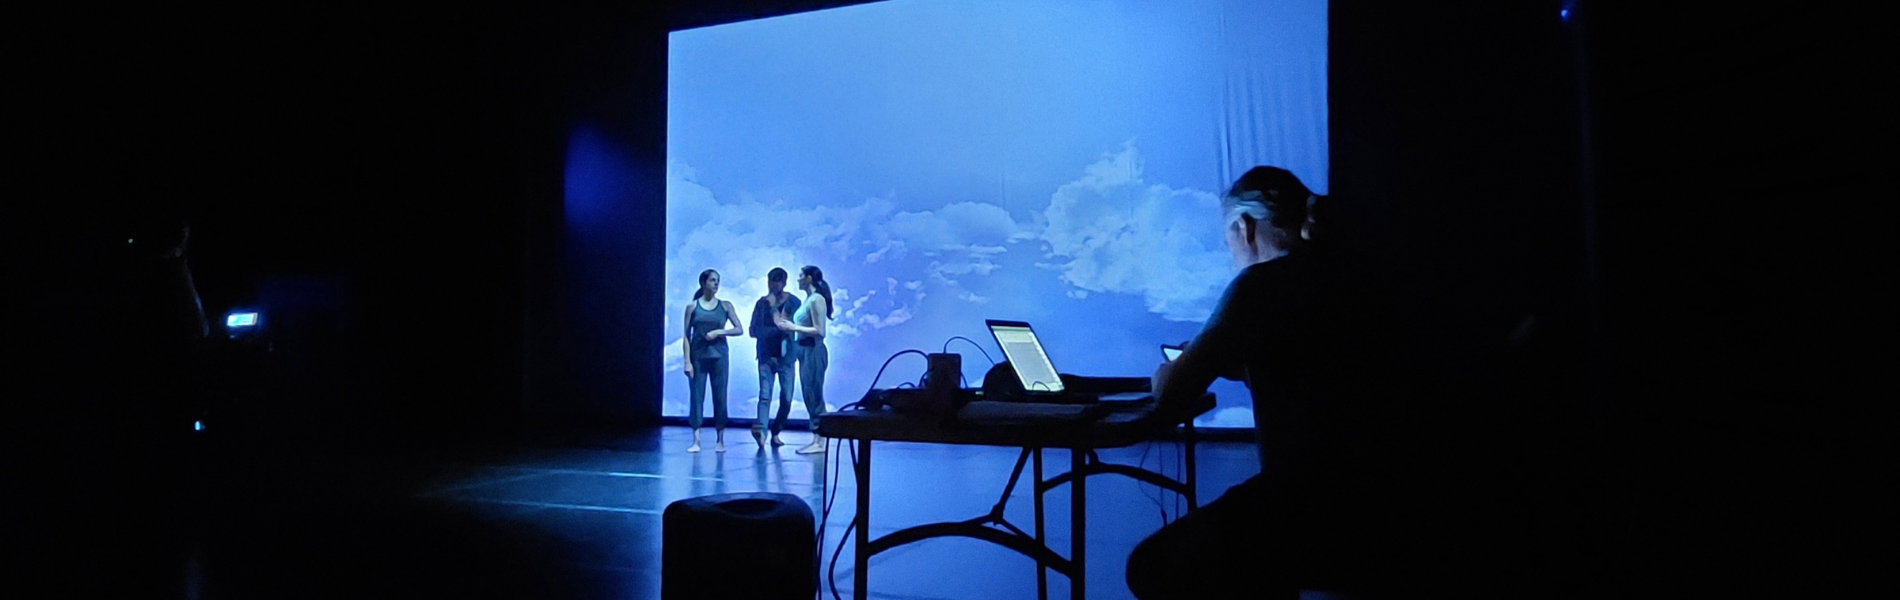 actors on stage with a blue background, a person with a laptop in the foreground